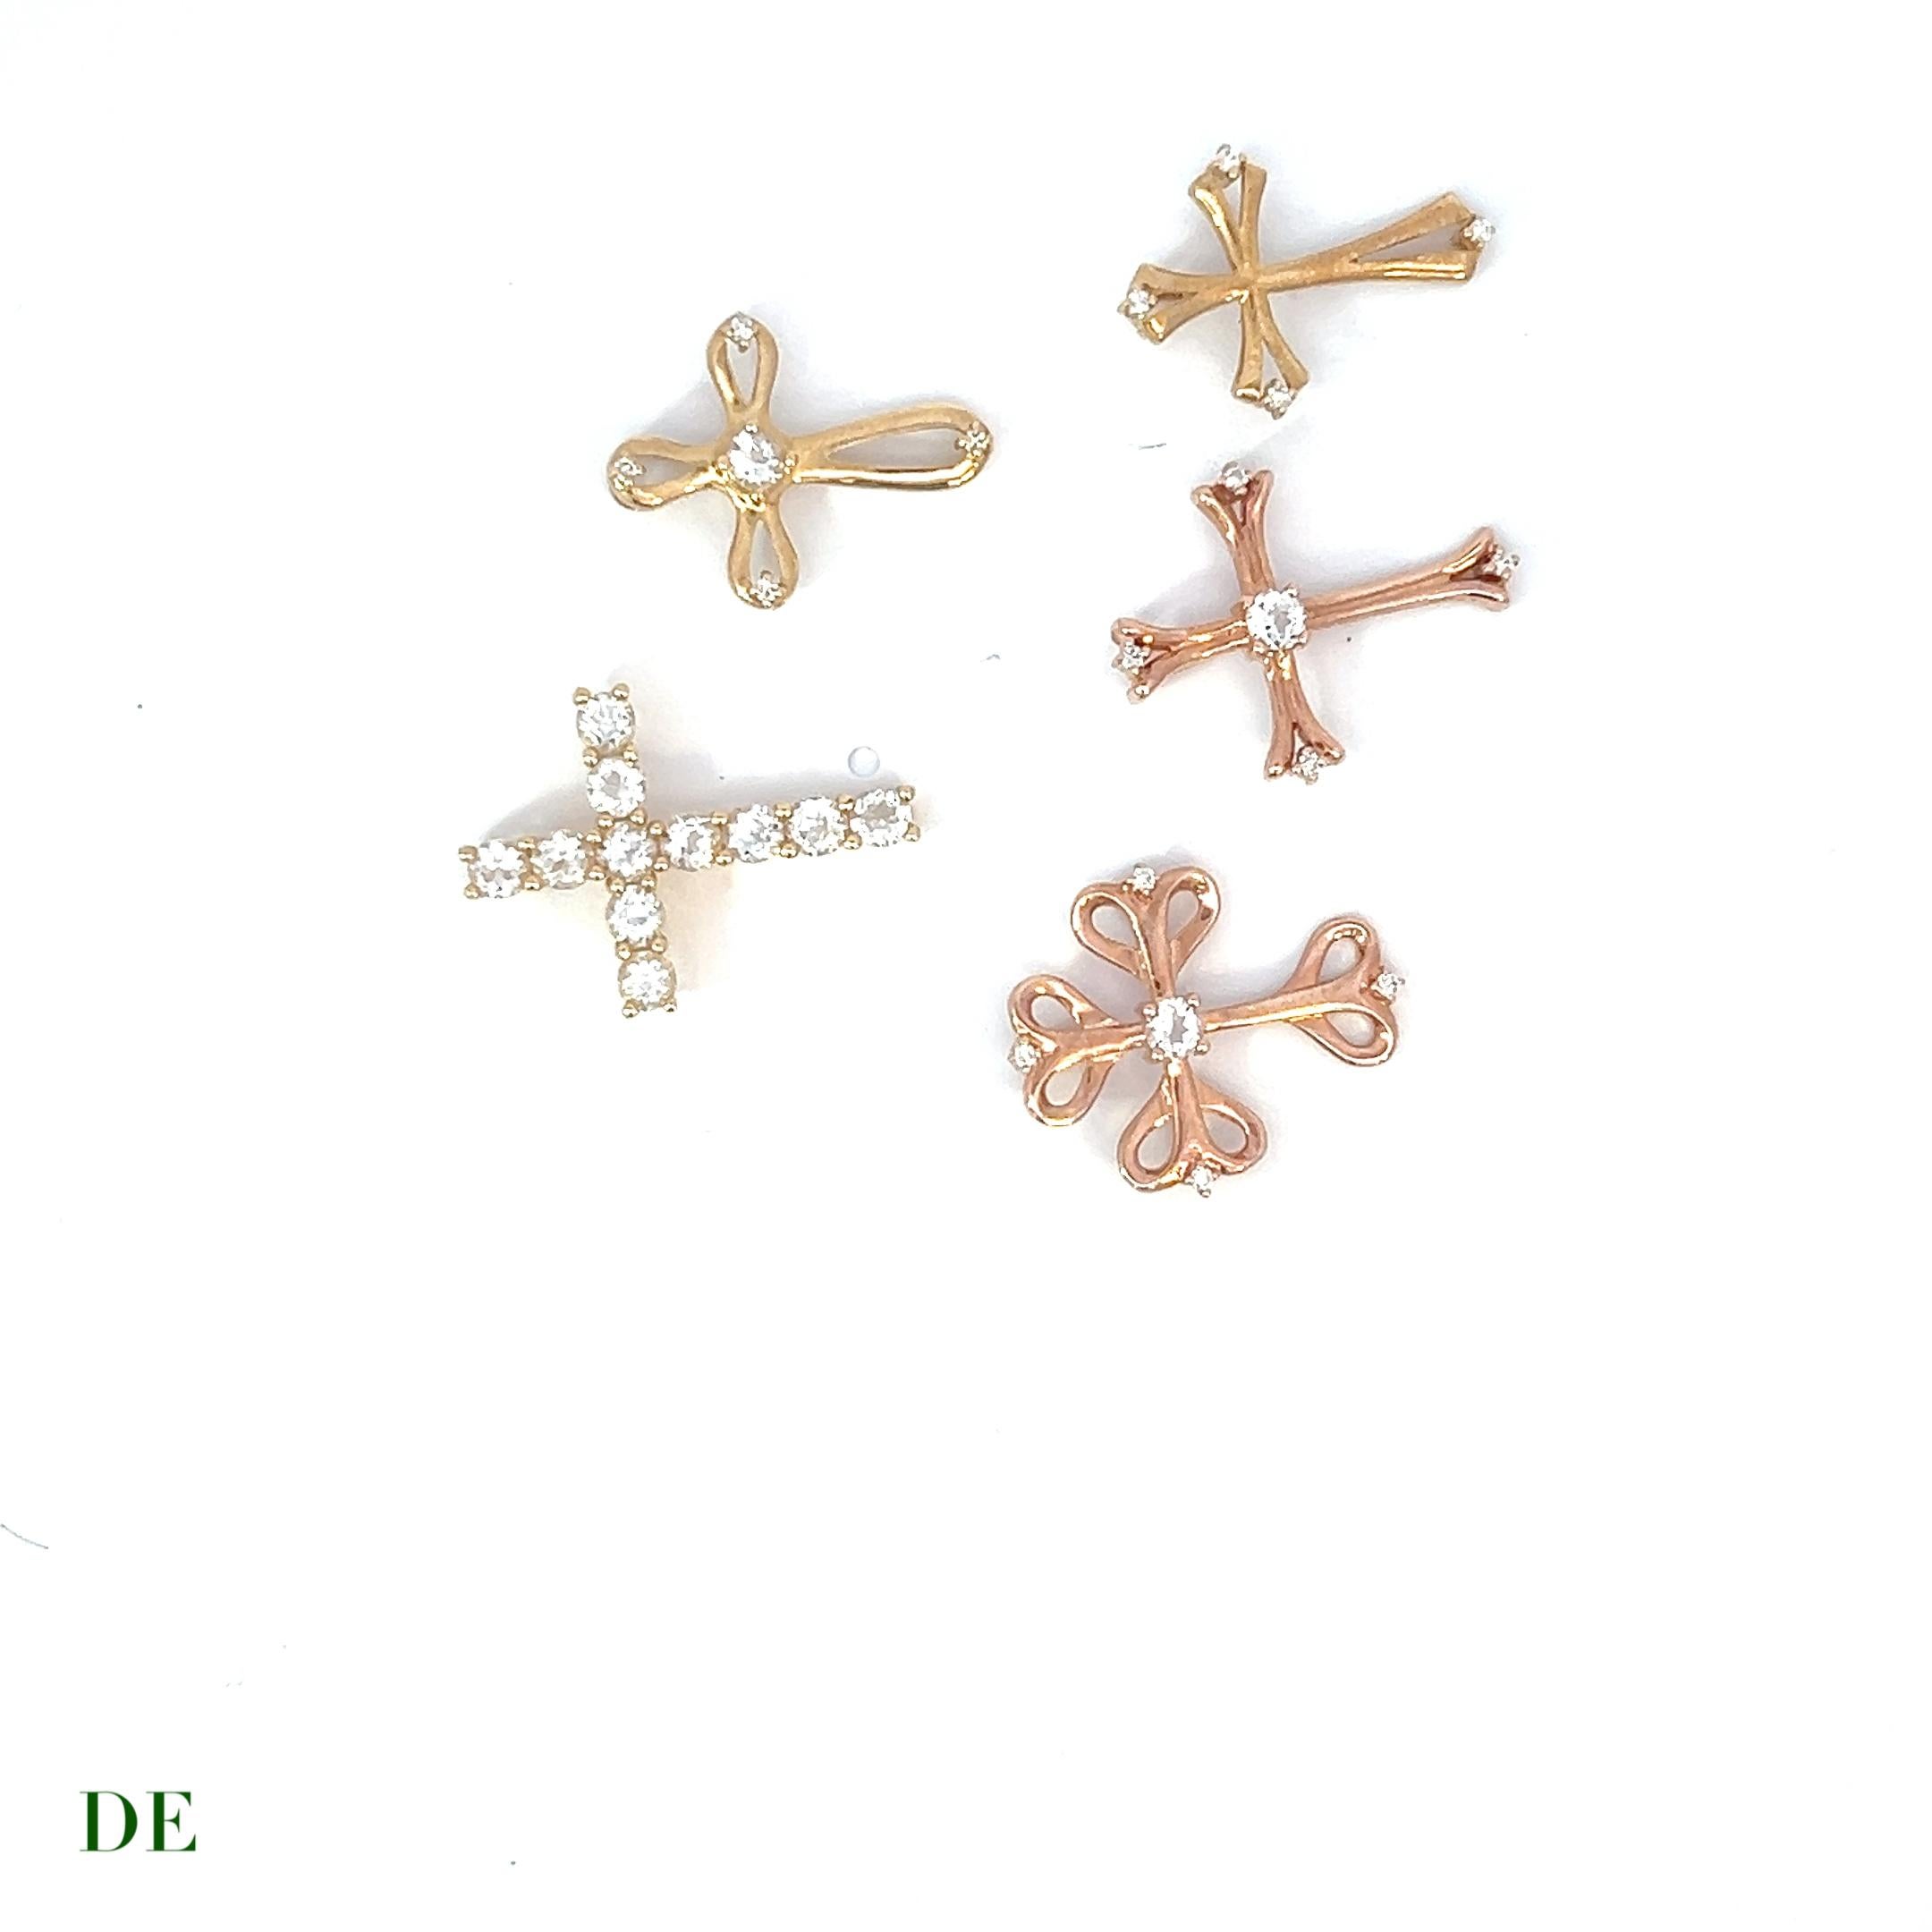 Family Cross Collection - 5 pcs of 14k Gold Cross with Diamonds and White Topaz

Introducing the Family Cross Collection - a set of 5 exquisite 14k Gold Cross Pendants adorned with Diamonds and White Topaz. This collection celebrates the bond of